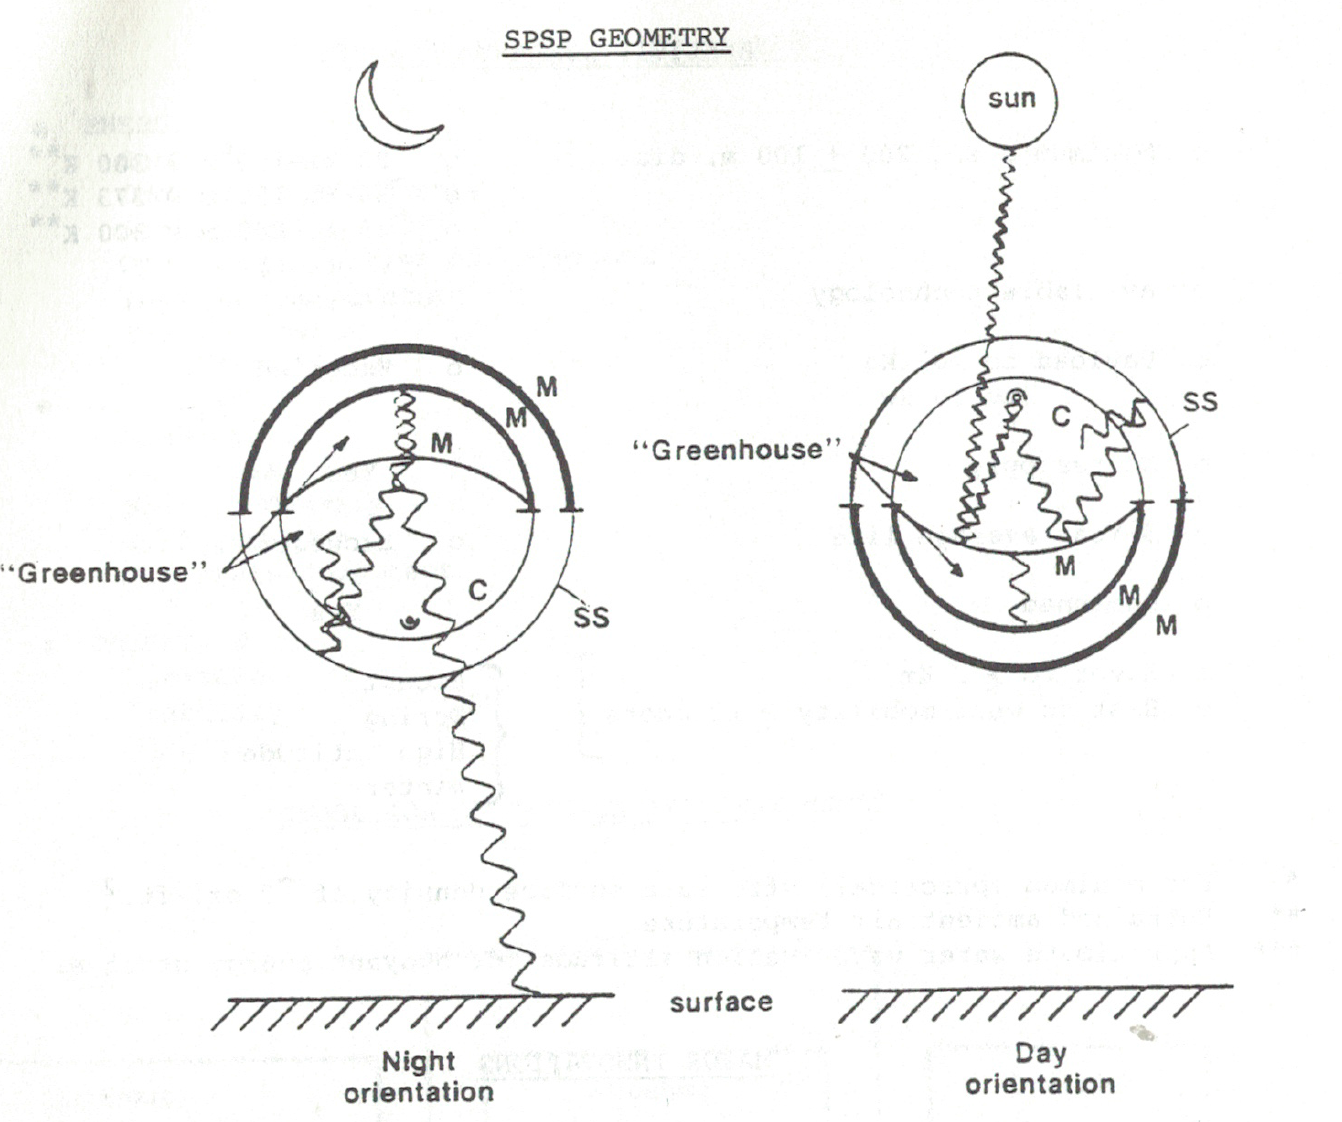 Diagram of STARS and its day and night orientation, from Alternative Energy 3 Conference presentation